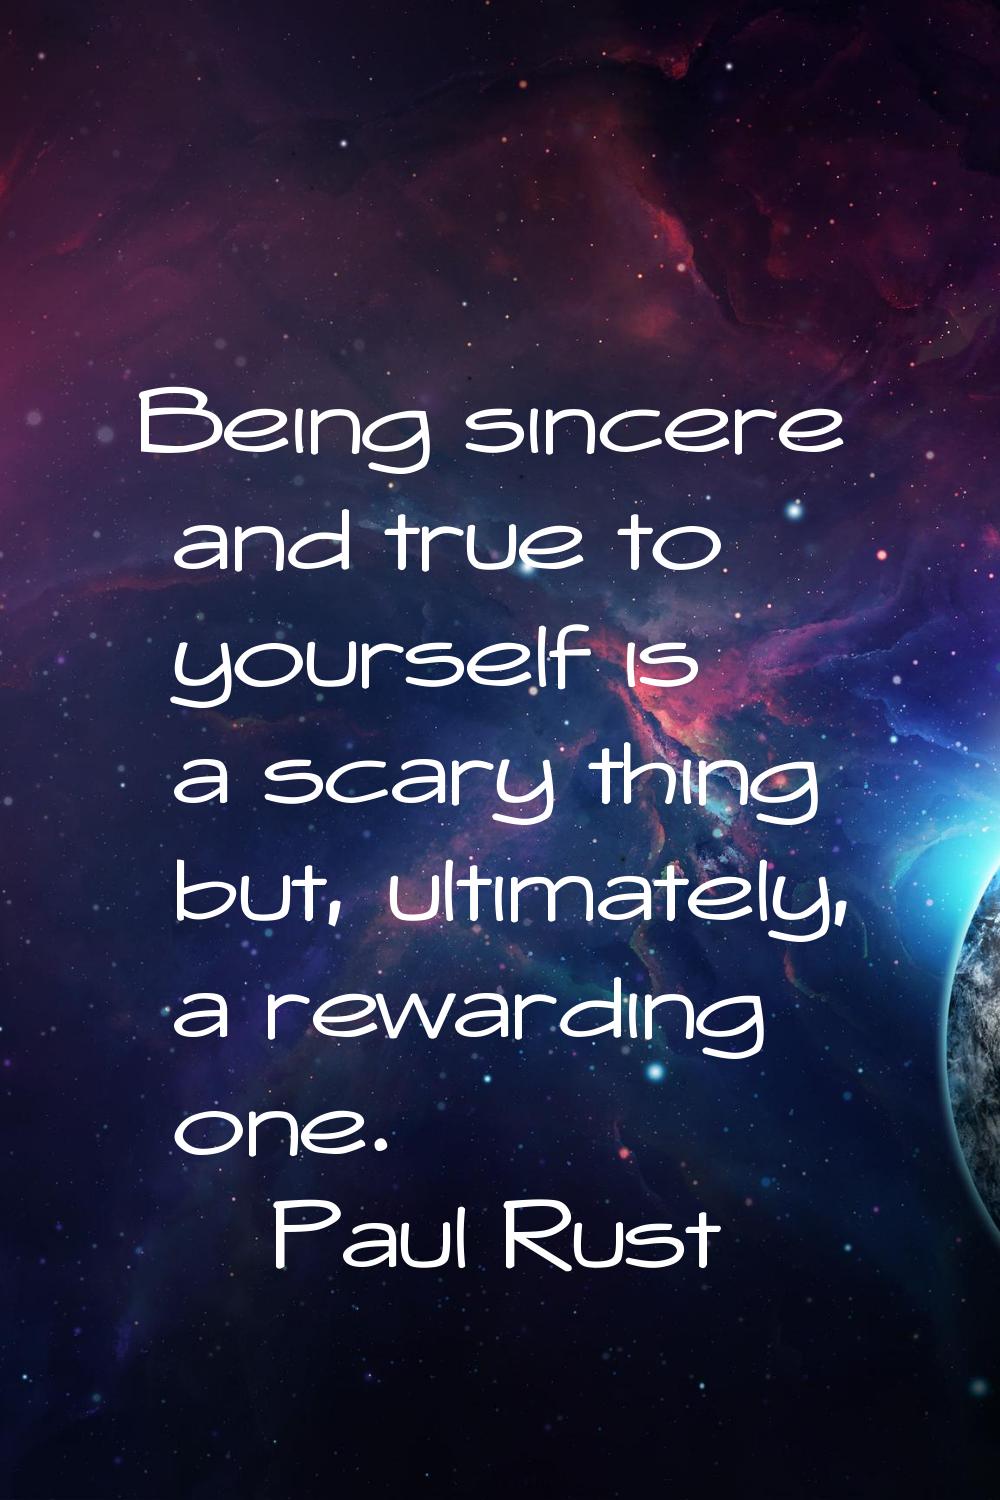 Being sincere and true to yourself is a scary thing but, ultimately, a rewarding one.